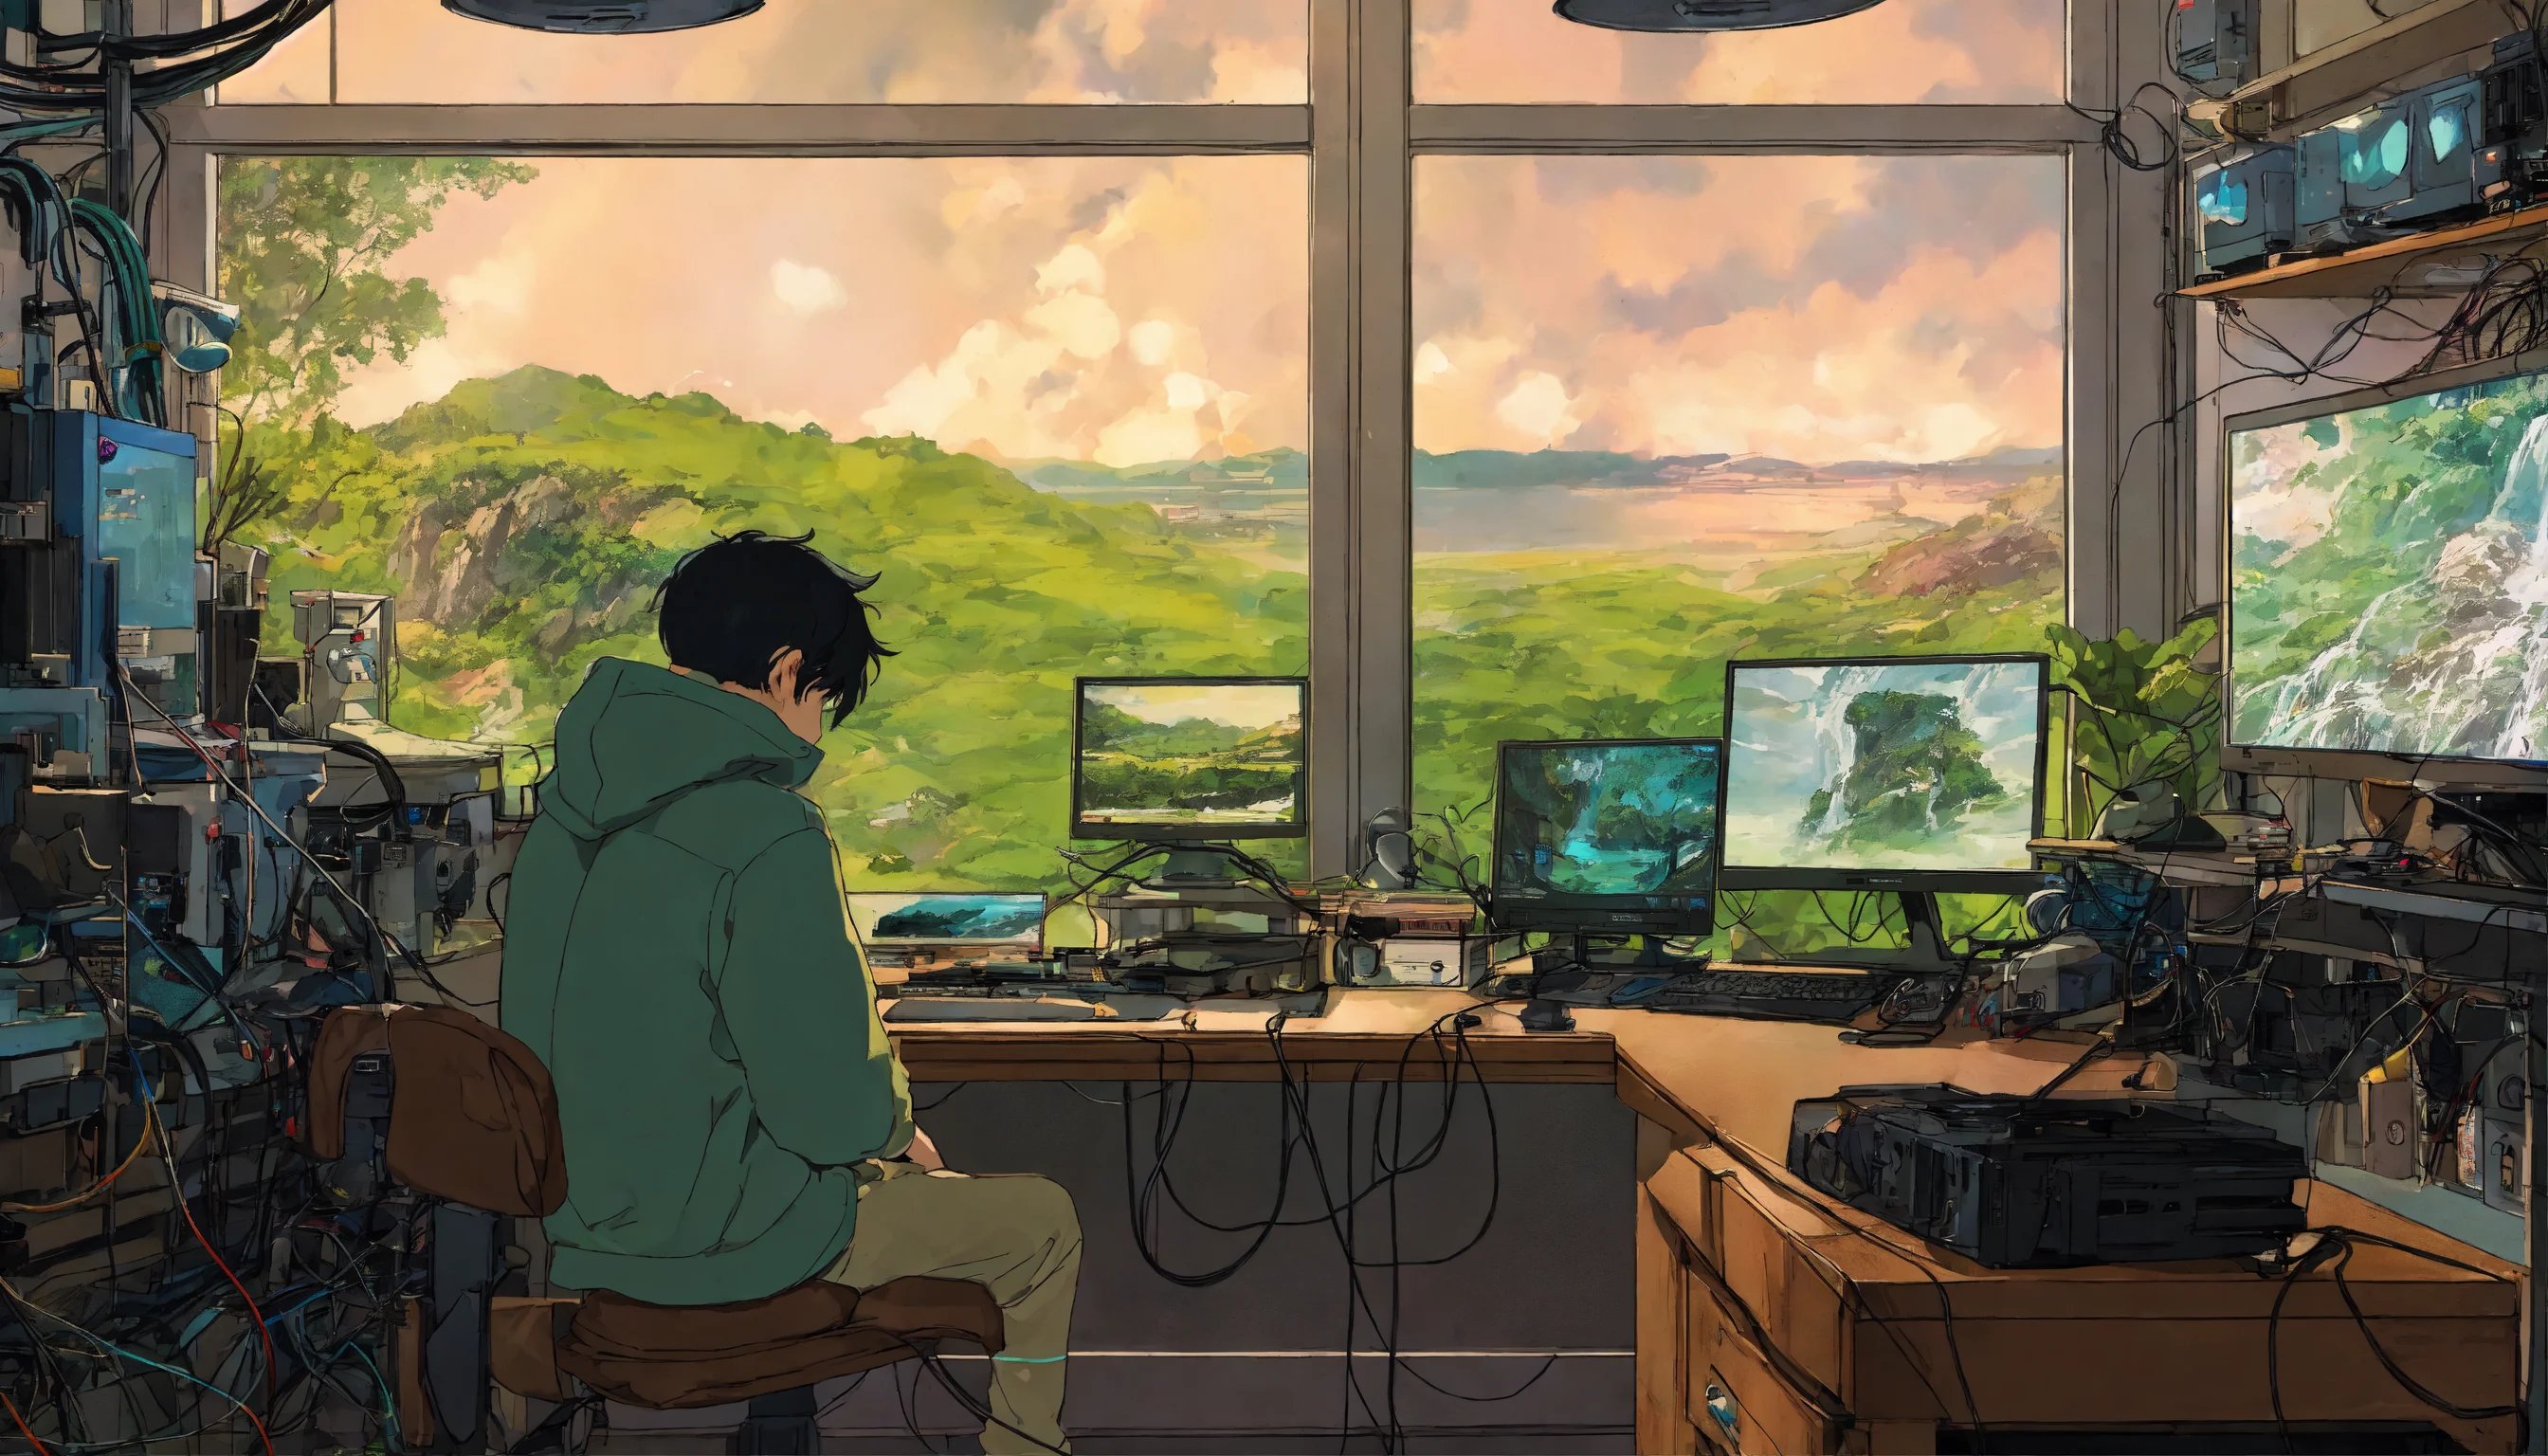 Kazi Hossain in a computer lab anime drawing